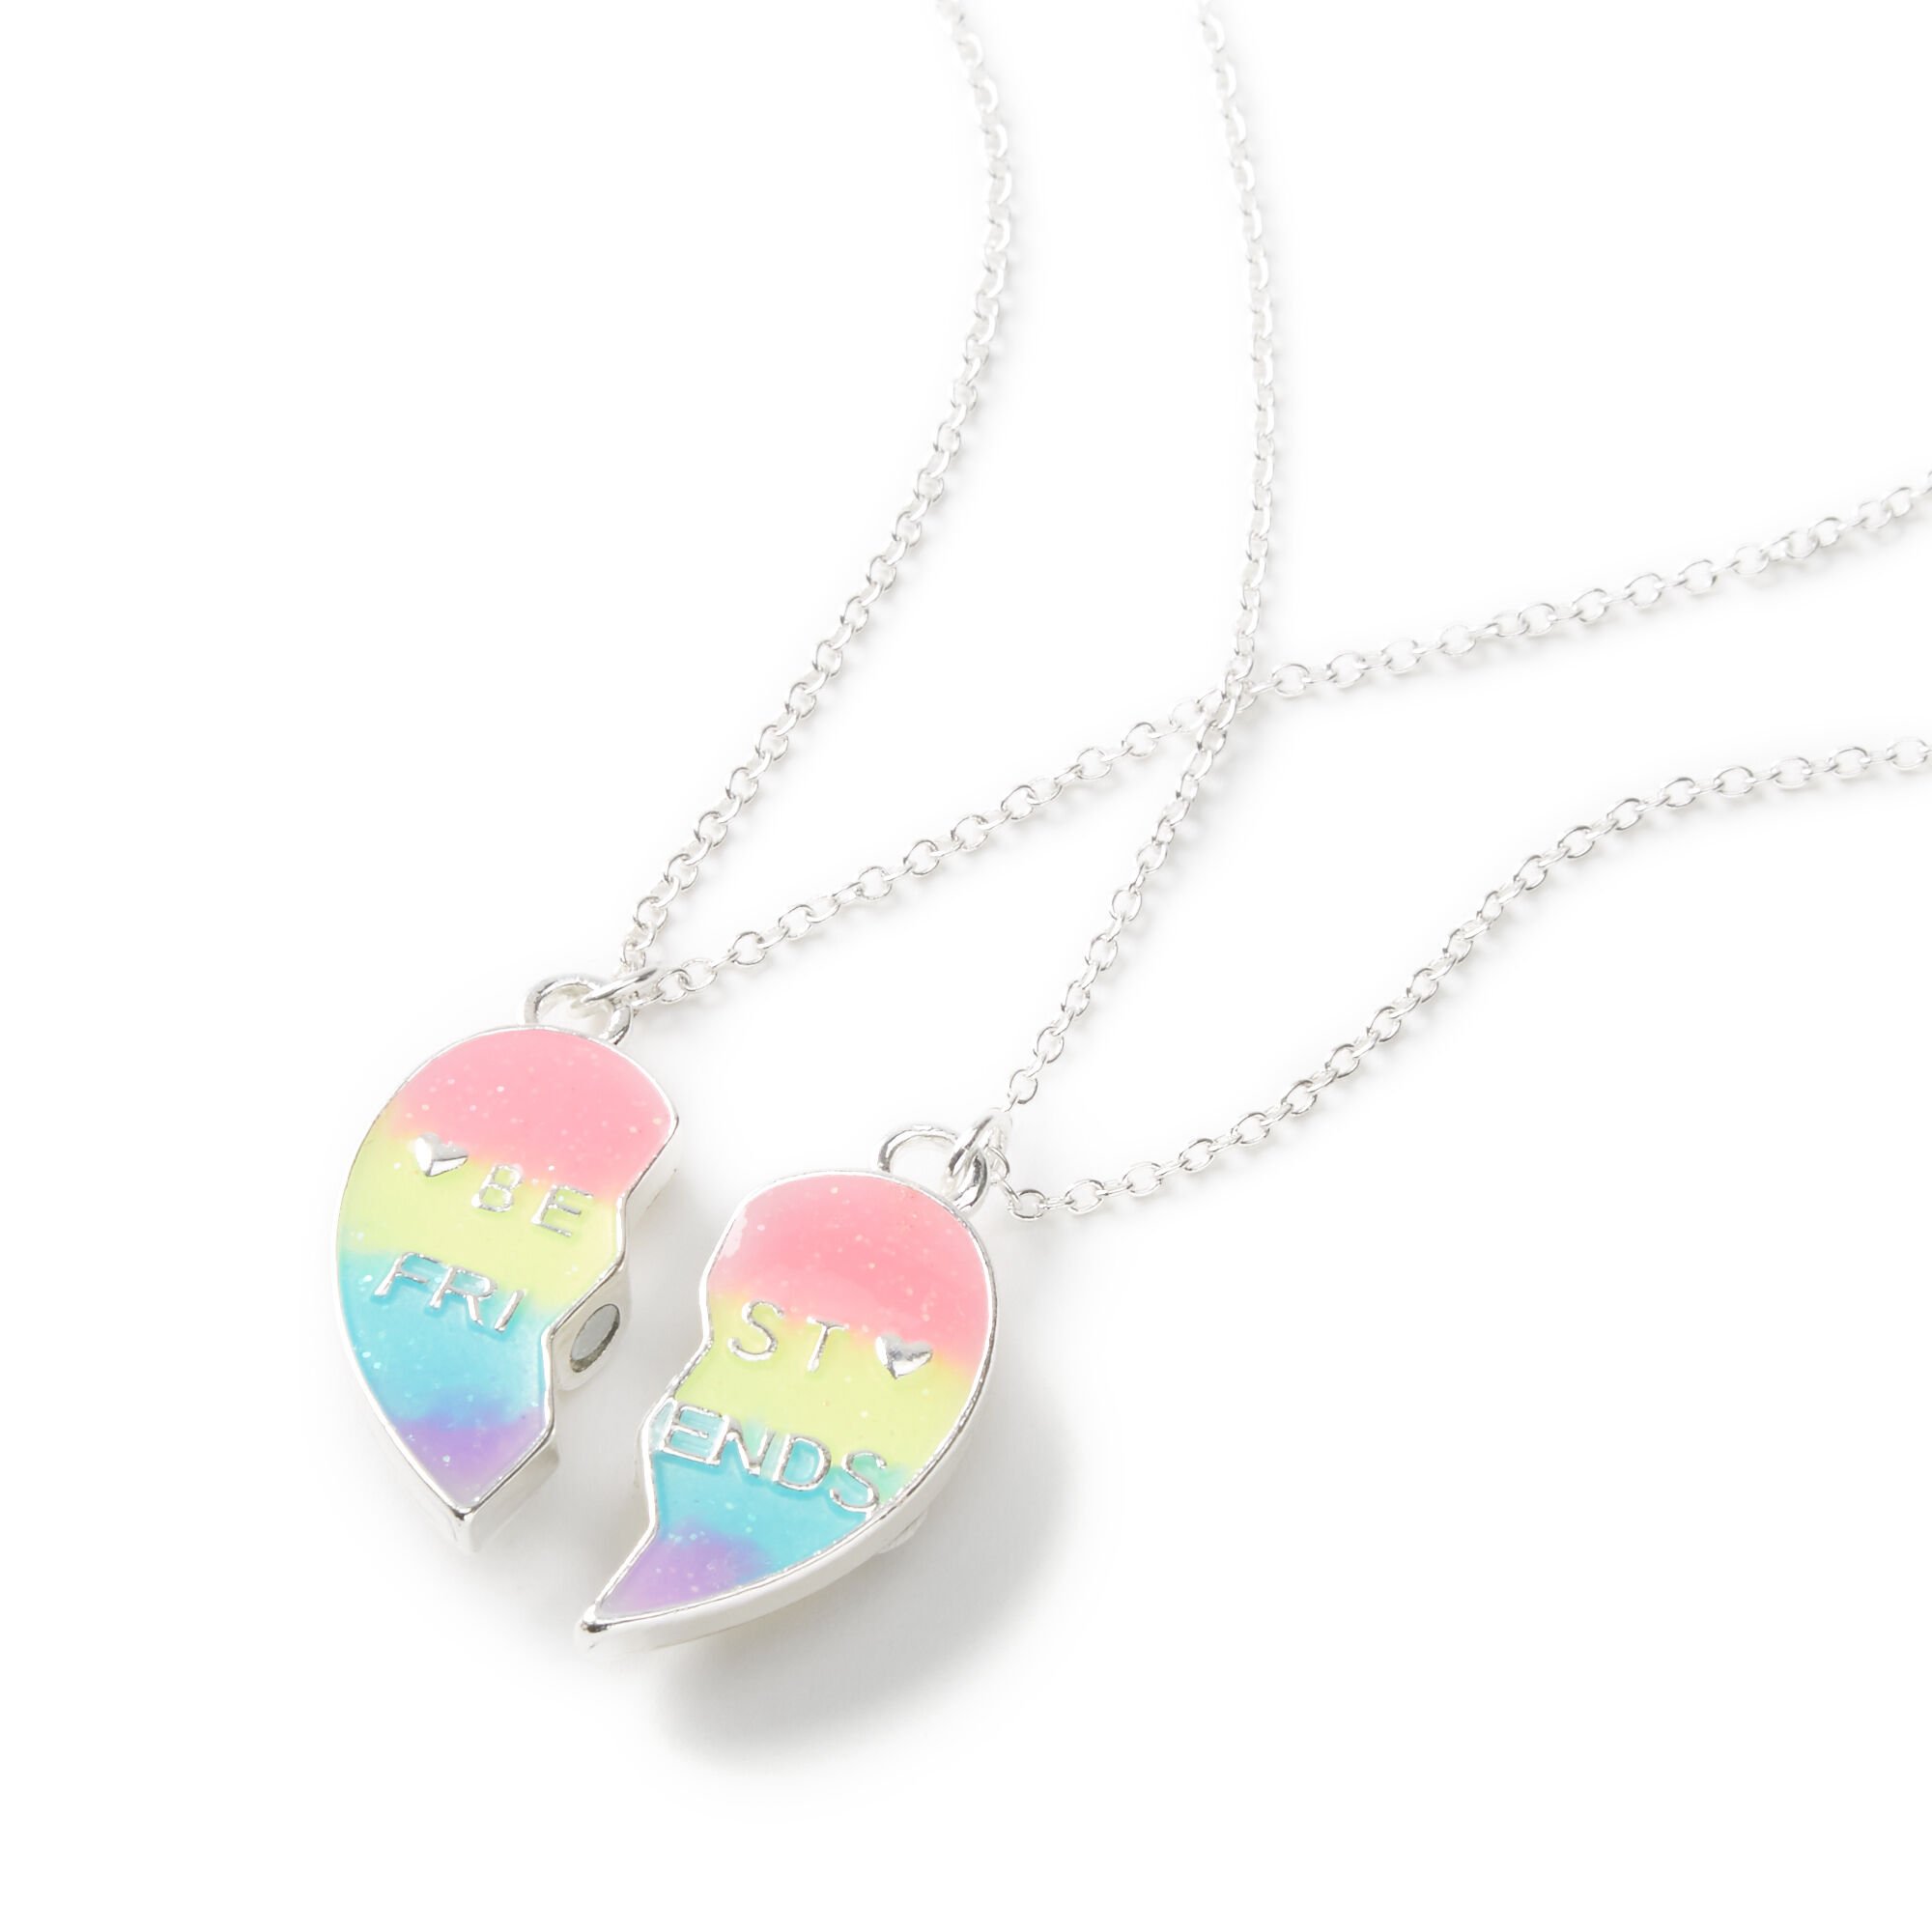 View Claires Best Friends Rainbow Striped Heart Pendant Necklaces 2 Pack Silver information